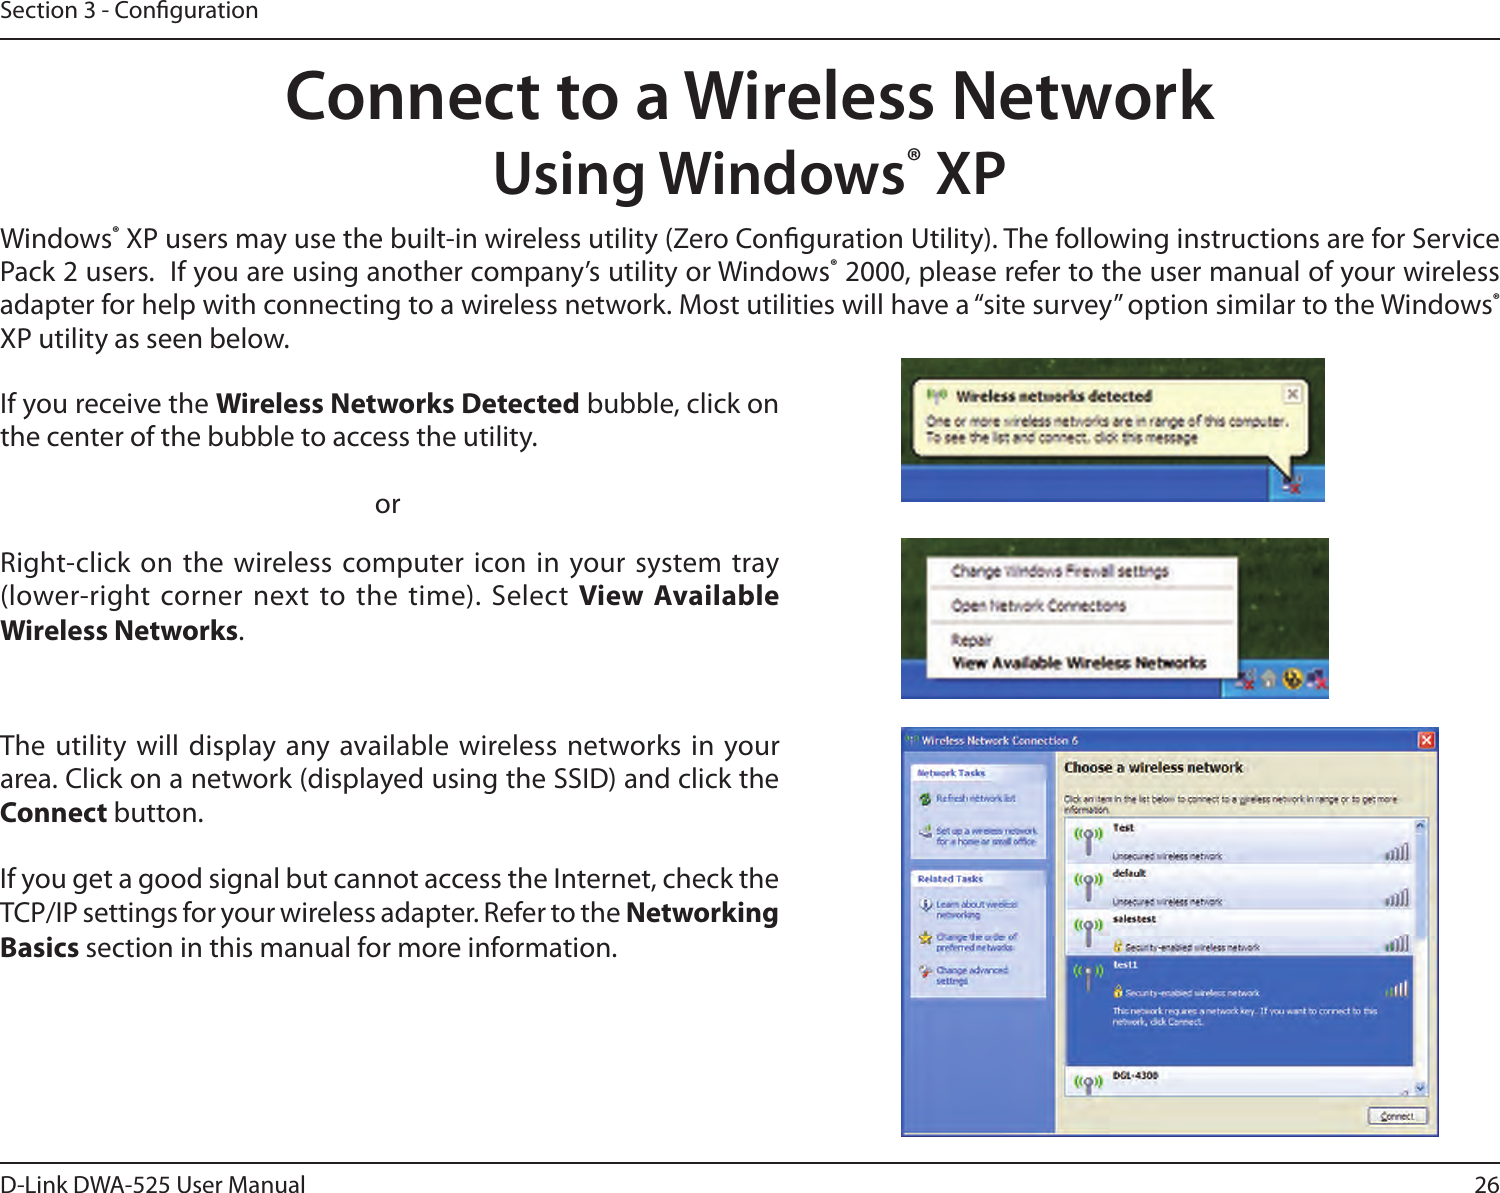 26D-Link DWA-525 User ManualSection 3 - CongurationConnect to a Wireless NetworkUsing Windows® XPWindows®XPusersmayusethebuilt-inwirelessutility(ZeroCongurationUtility).ThefollowinginstructionsareforServicePack2users.Ifyouareusinganothercompany’sutilityorWindows®2000,pleaserefertotheusermanualofyourwirelessadapter for help with connecting to a wireless network. Most utilities will have a “site survey” option similar to the Windows® XP utility as seen below.Right-click on the wireless computer icon in your system tray (lower-right corner next to the time). Select View Available Wireless Networks.If you receive the Wireless Networks Detectedbubble,clickonthe center of the bubble to access the utility.     orThe utility will display any available wireless networks in  your area.Clickonanetwork(displayedusingtheSSID)andclicktheConnect button.IfyougetagoodsignalbutcannotaccesstheInternet,checktheTCP/IP settings for your wireless adapter. Refer to the Networking Basics section in this manual for more information.